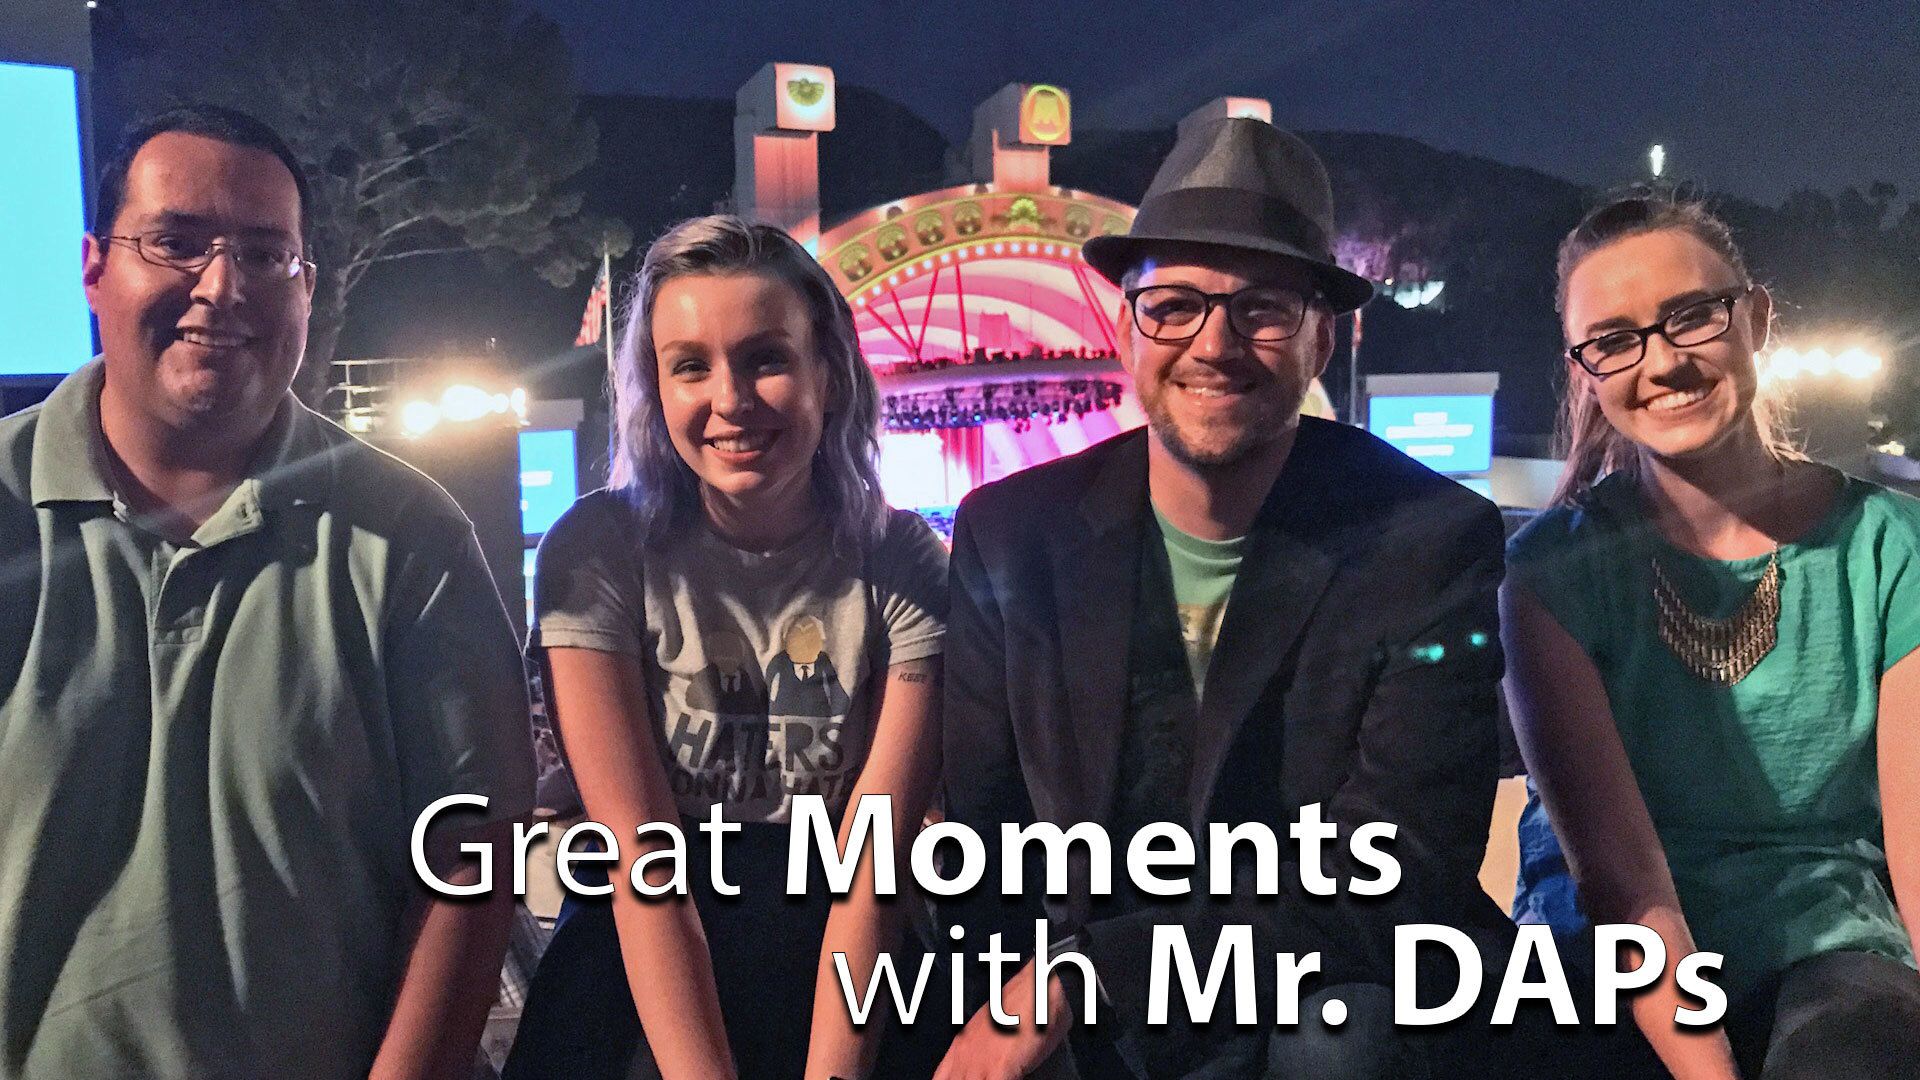 Hurricanes, Muppets, and More! - Great Moments with Mr. DAPs